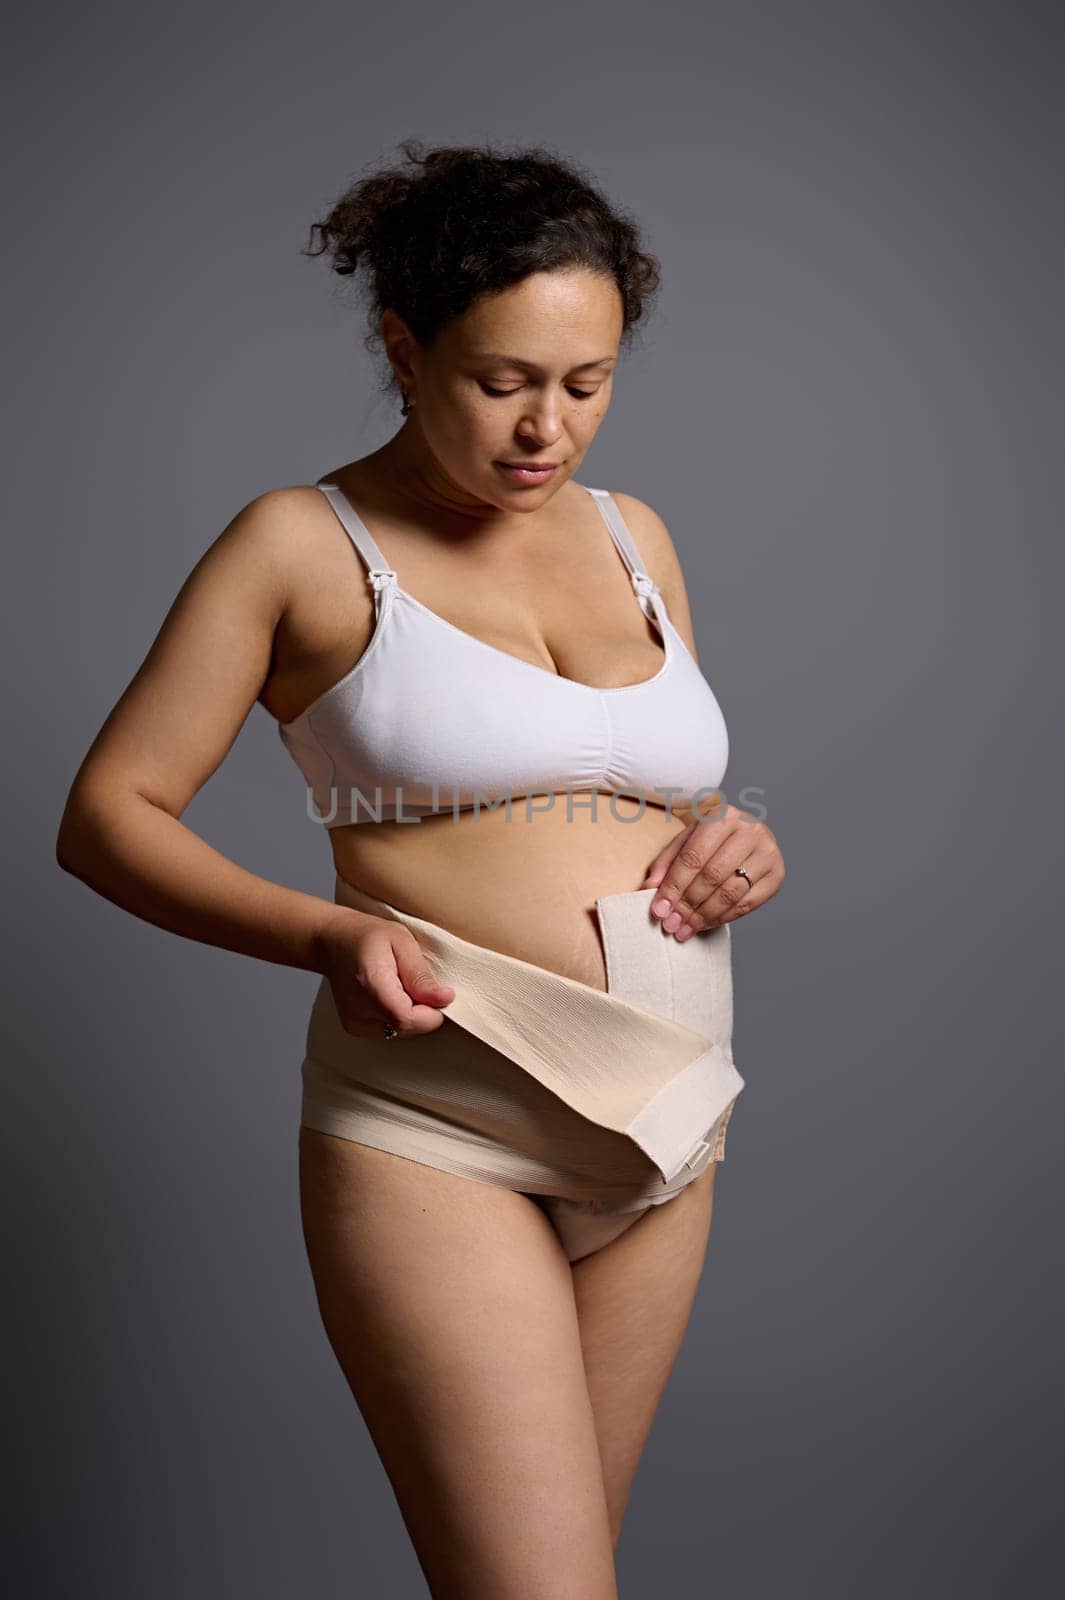 Portrait of naked woman in underwear after c-section, wearing elastic bandage, isolated over gray studio background by artgf